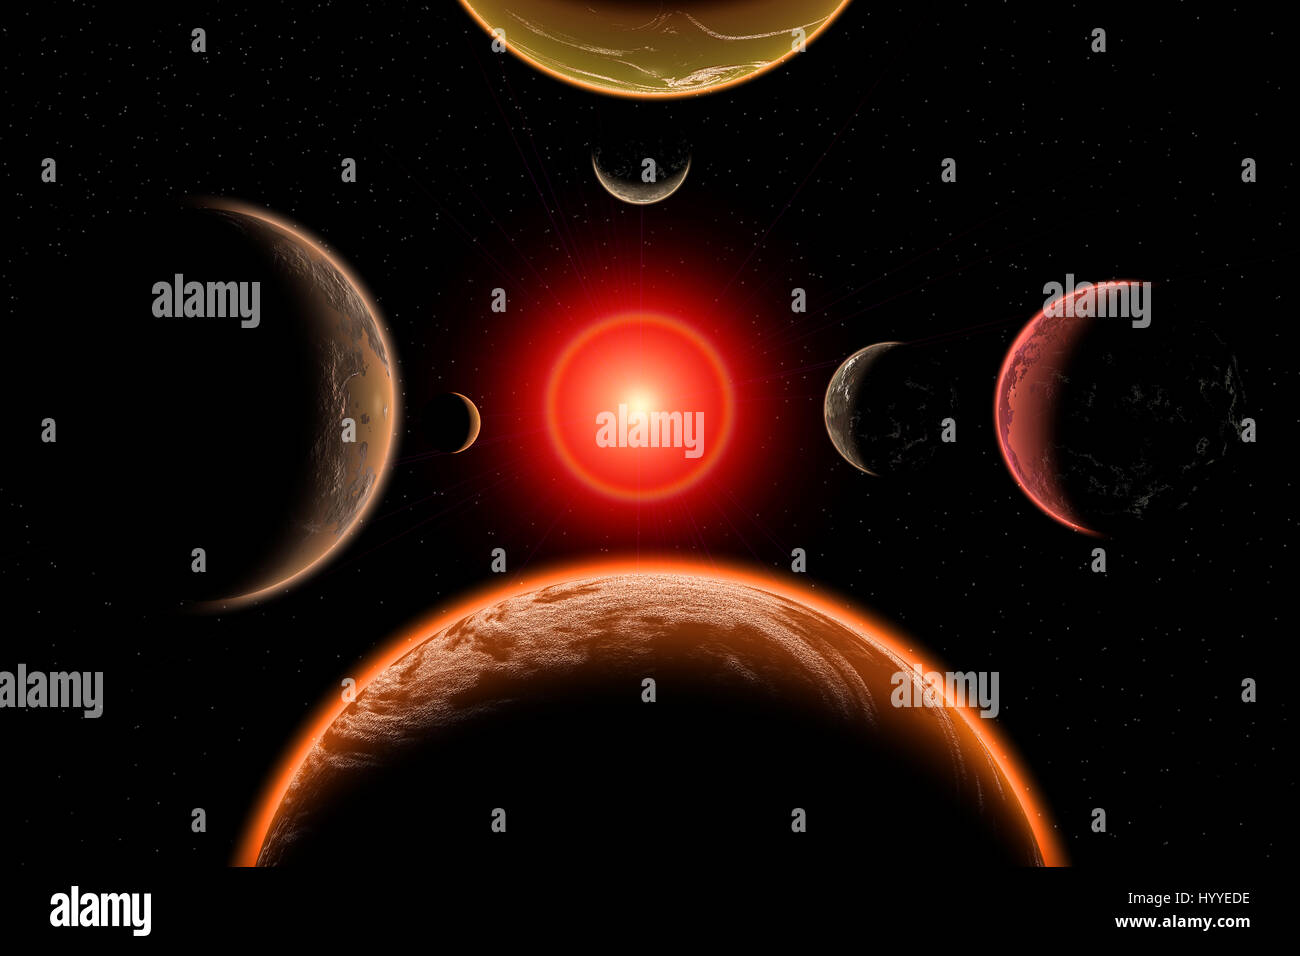 The Trappist Star System Is 39 Light Years From The Earth .Its Star As 7  Exoplanets In Its Orbit , Each Being A Similar Size To The Earth Stock  Photo - Alamy